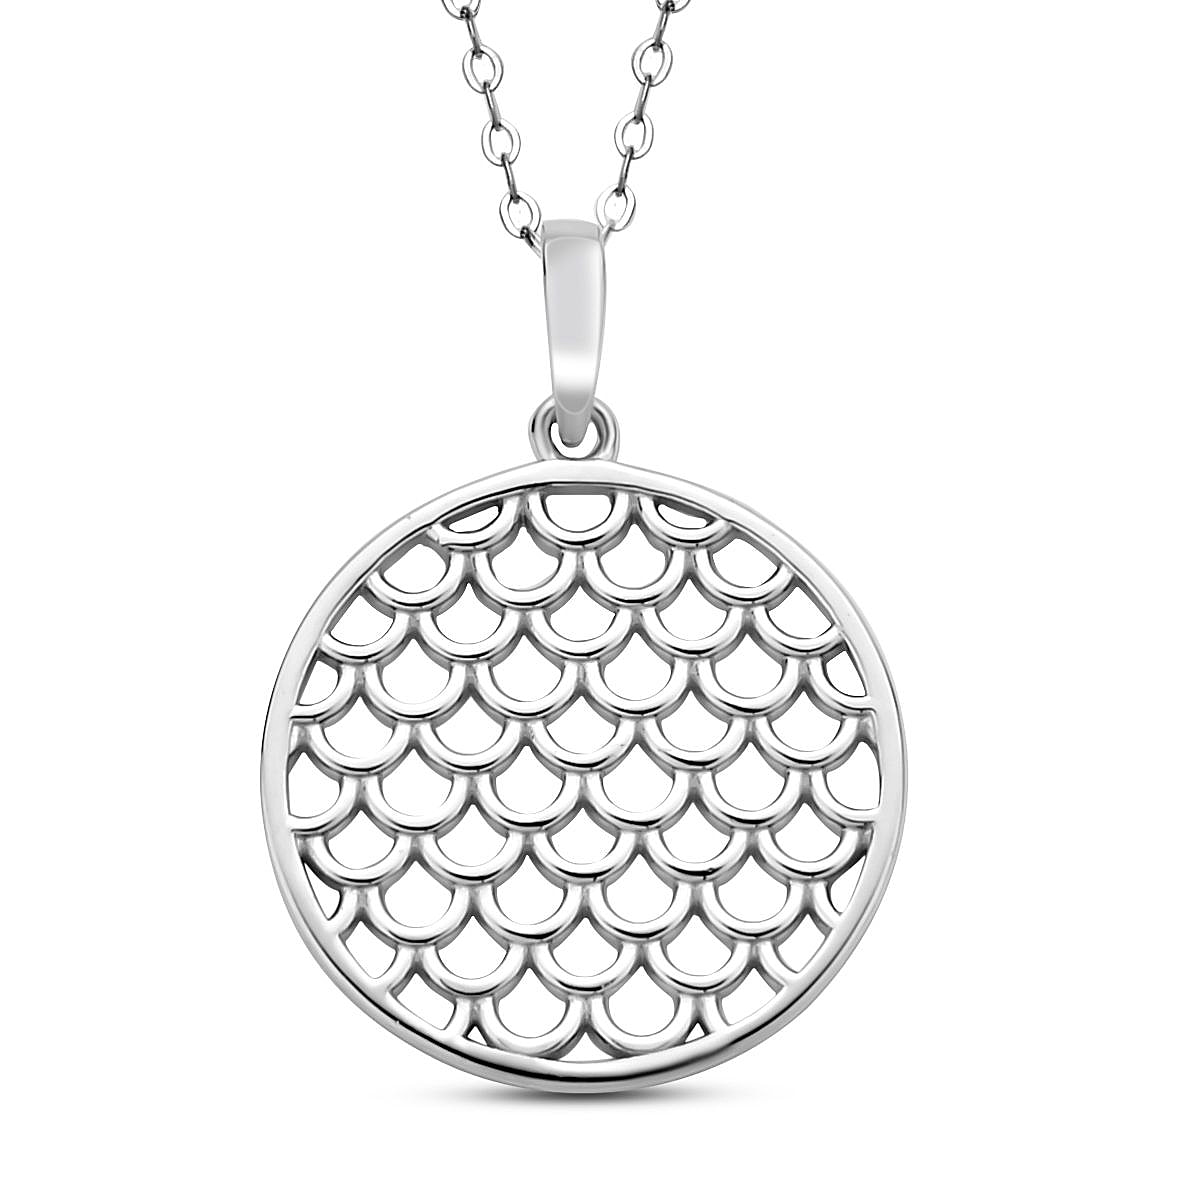 Rachel Galley Leaf Collection - Latticework Leaf Pattern Necklace Size 18  in Rhodium Plated Sterling Silver - 3861706 - TJC